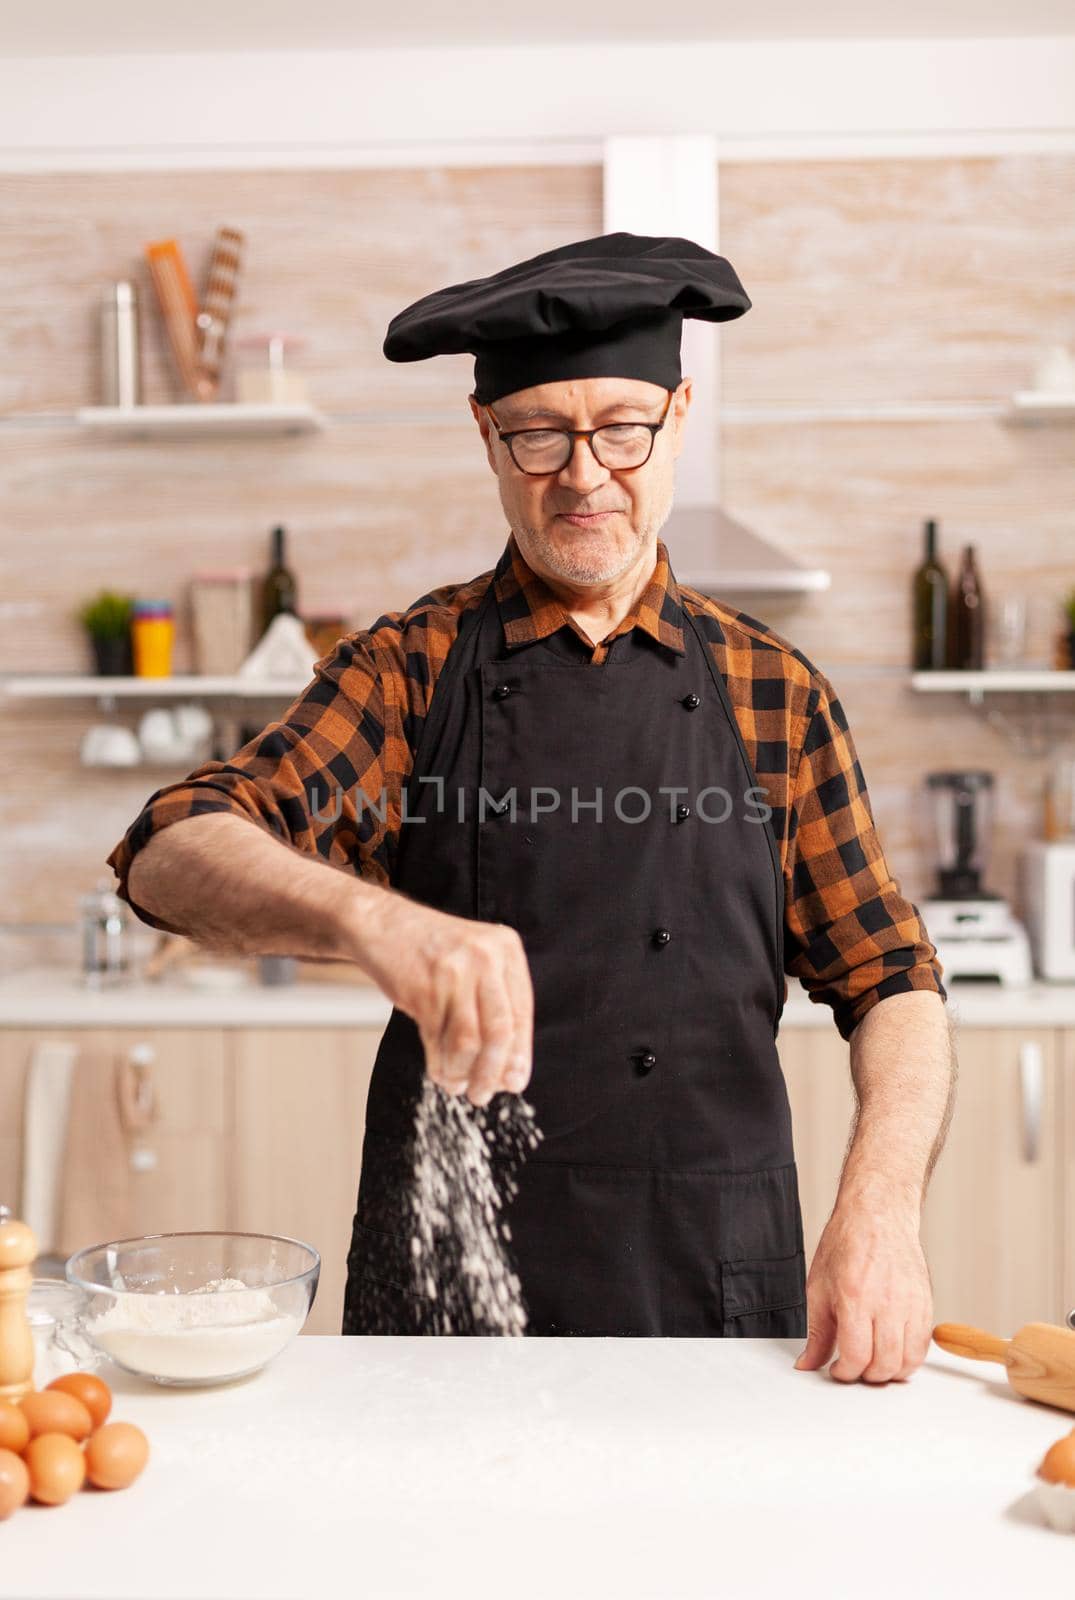 Happy retired chef preparing homemade pizza using bio wheat flour. Retired senior chef with bonete and apron, in kitchen uniform sprinkling sieving sifting ingredients by hand.